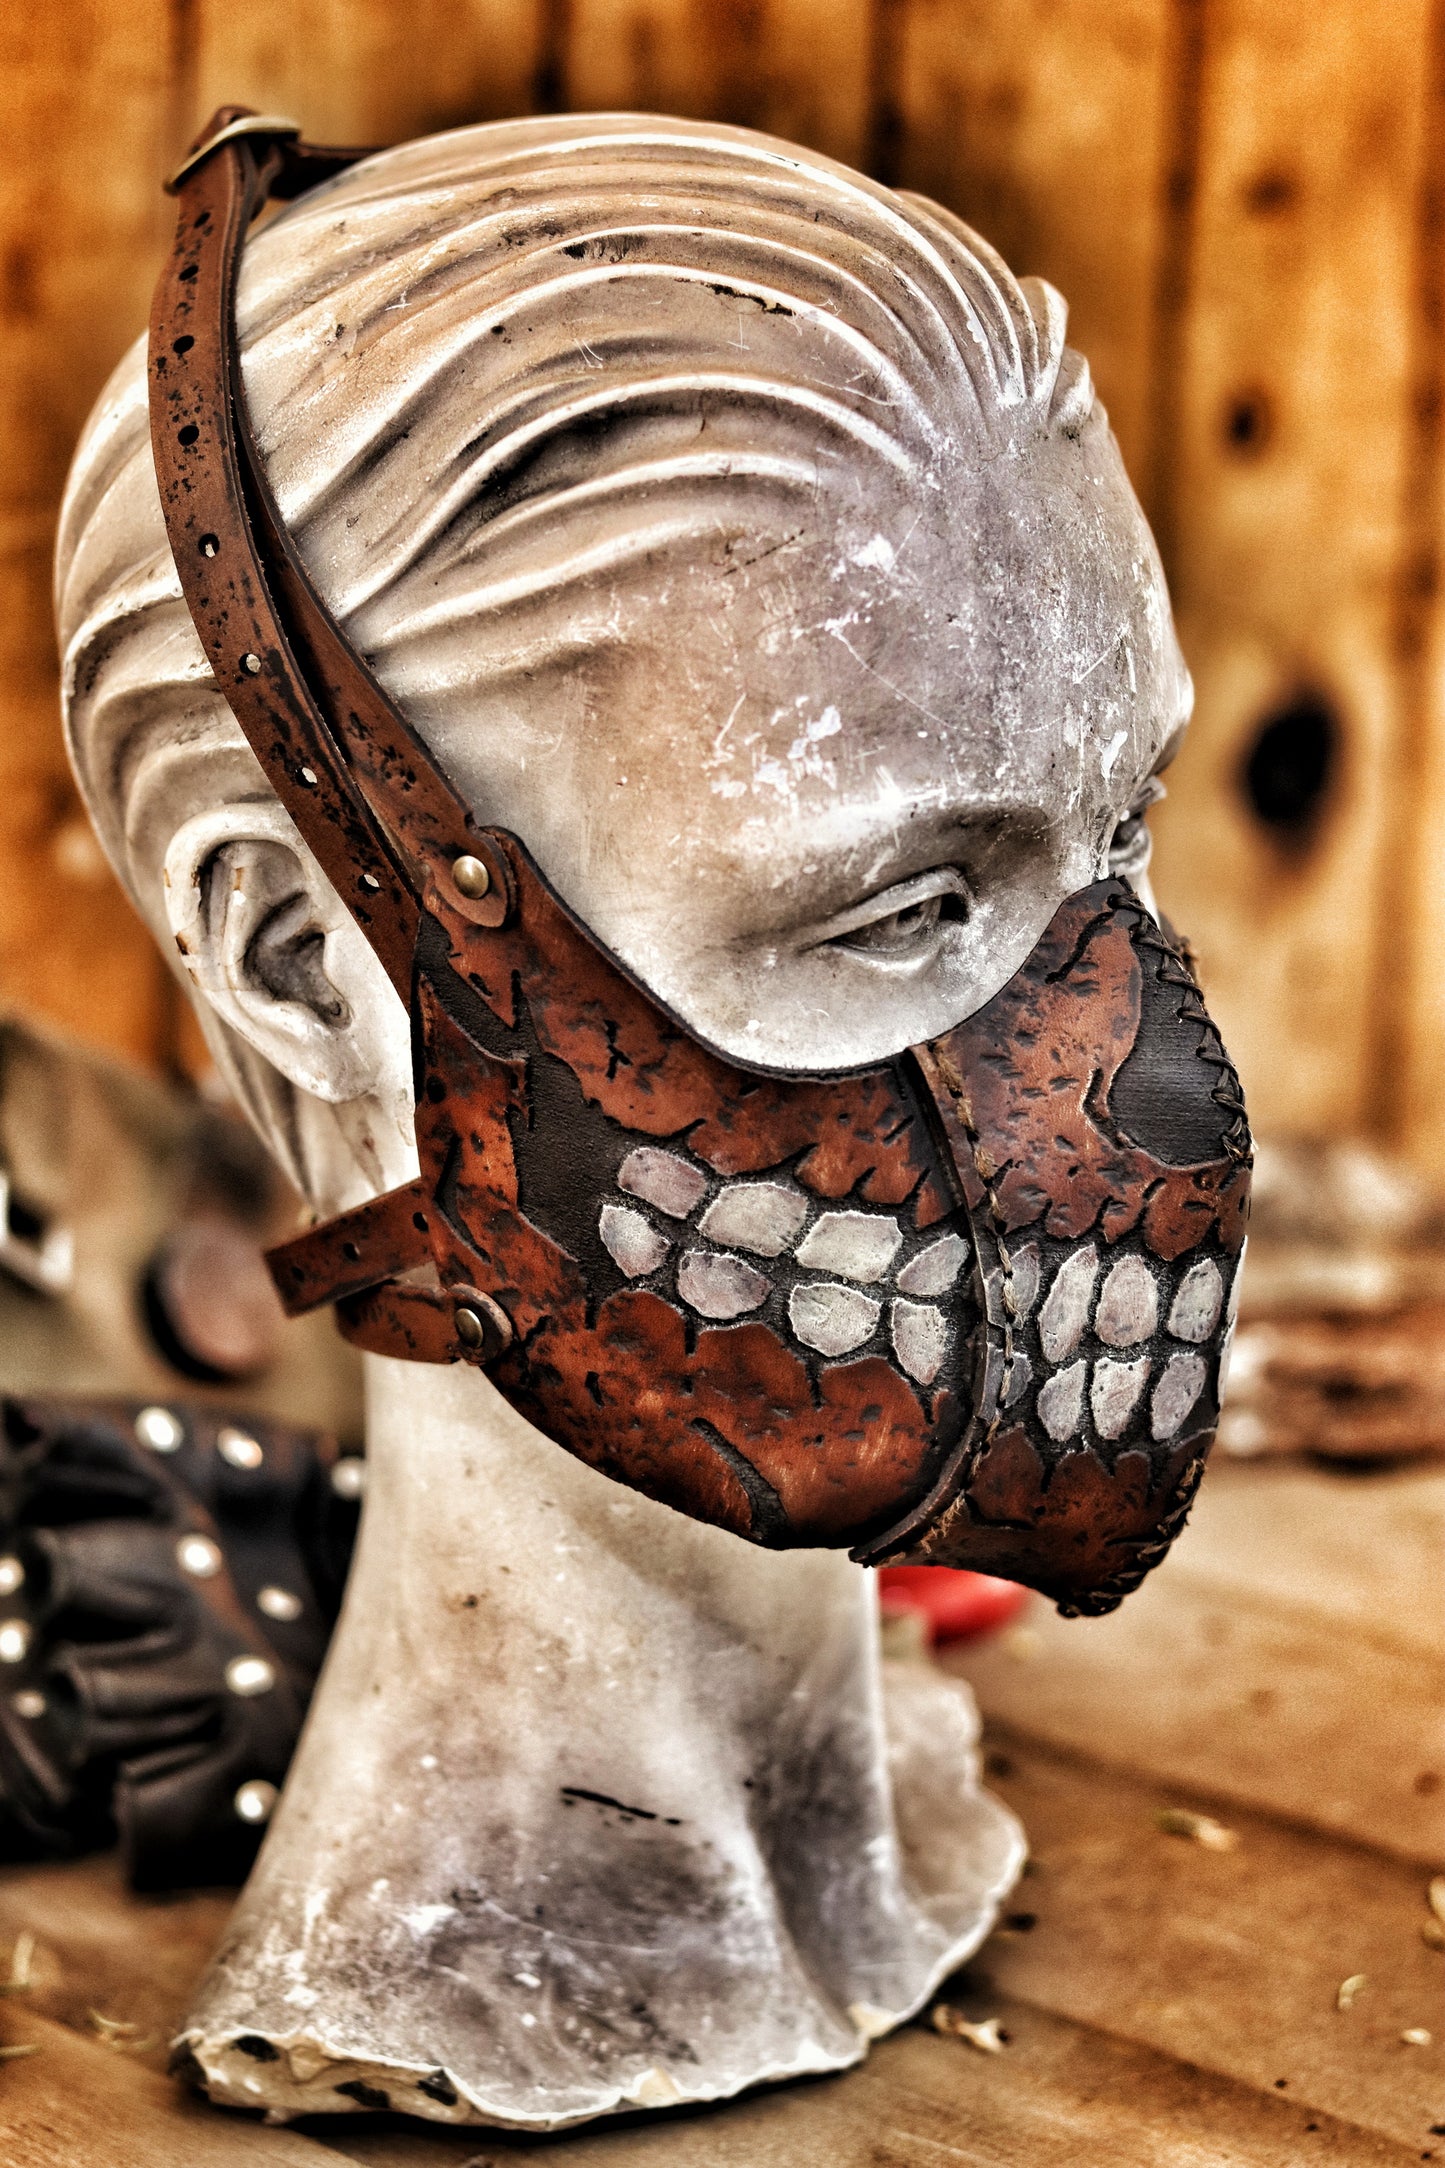 Zombie Leather Face Mask